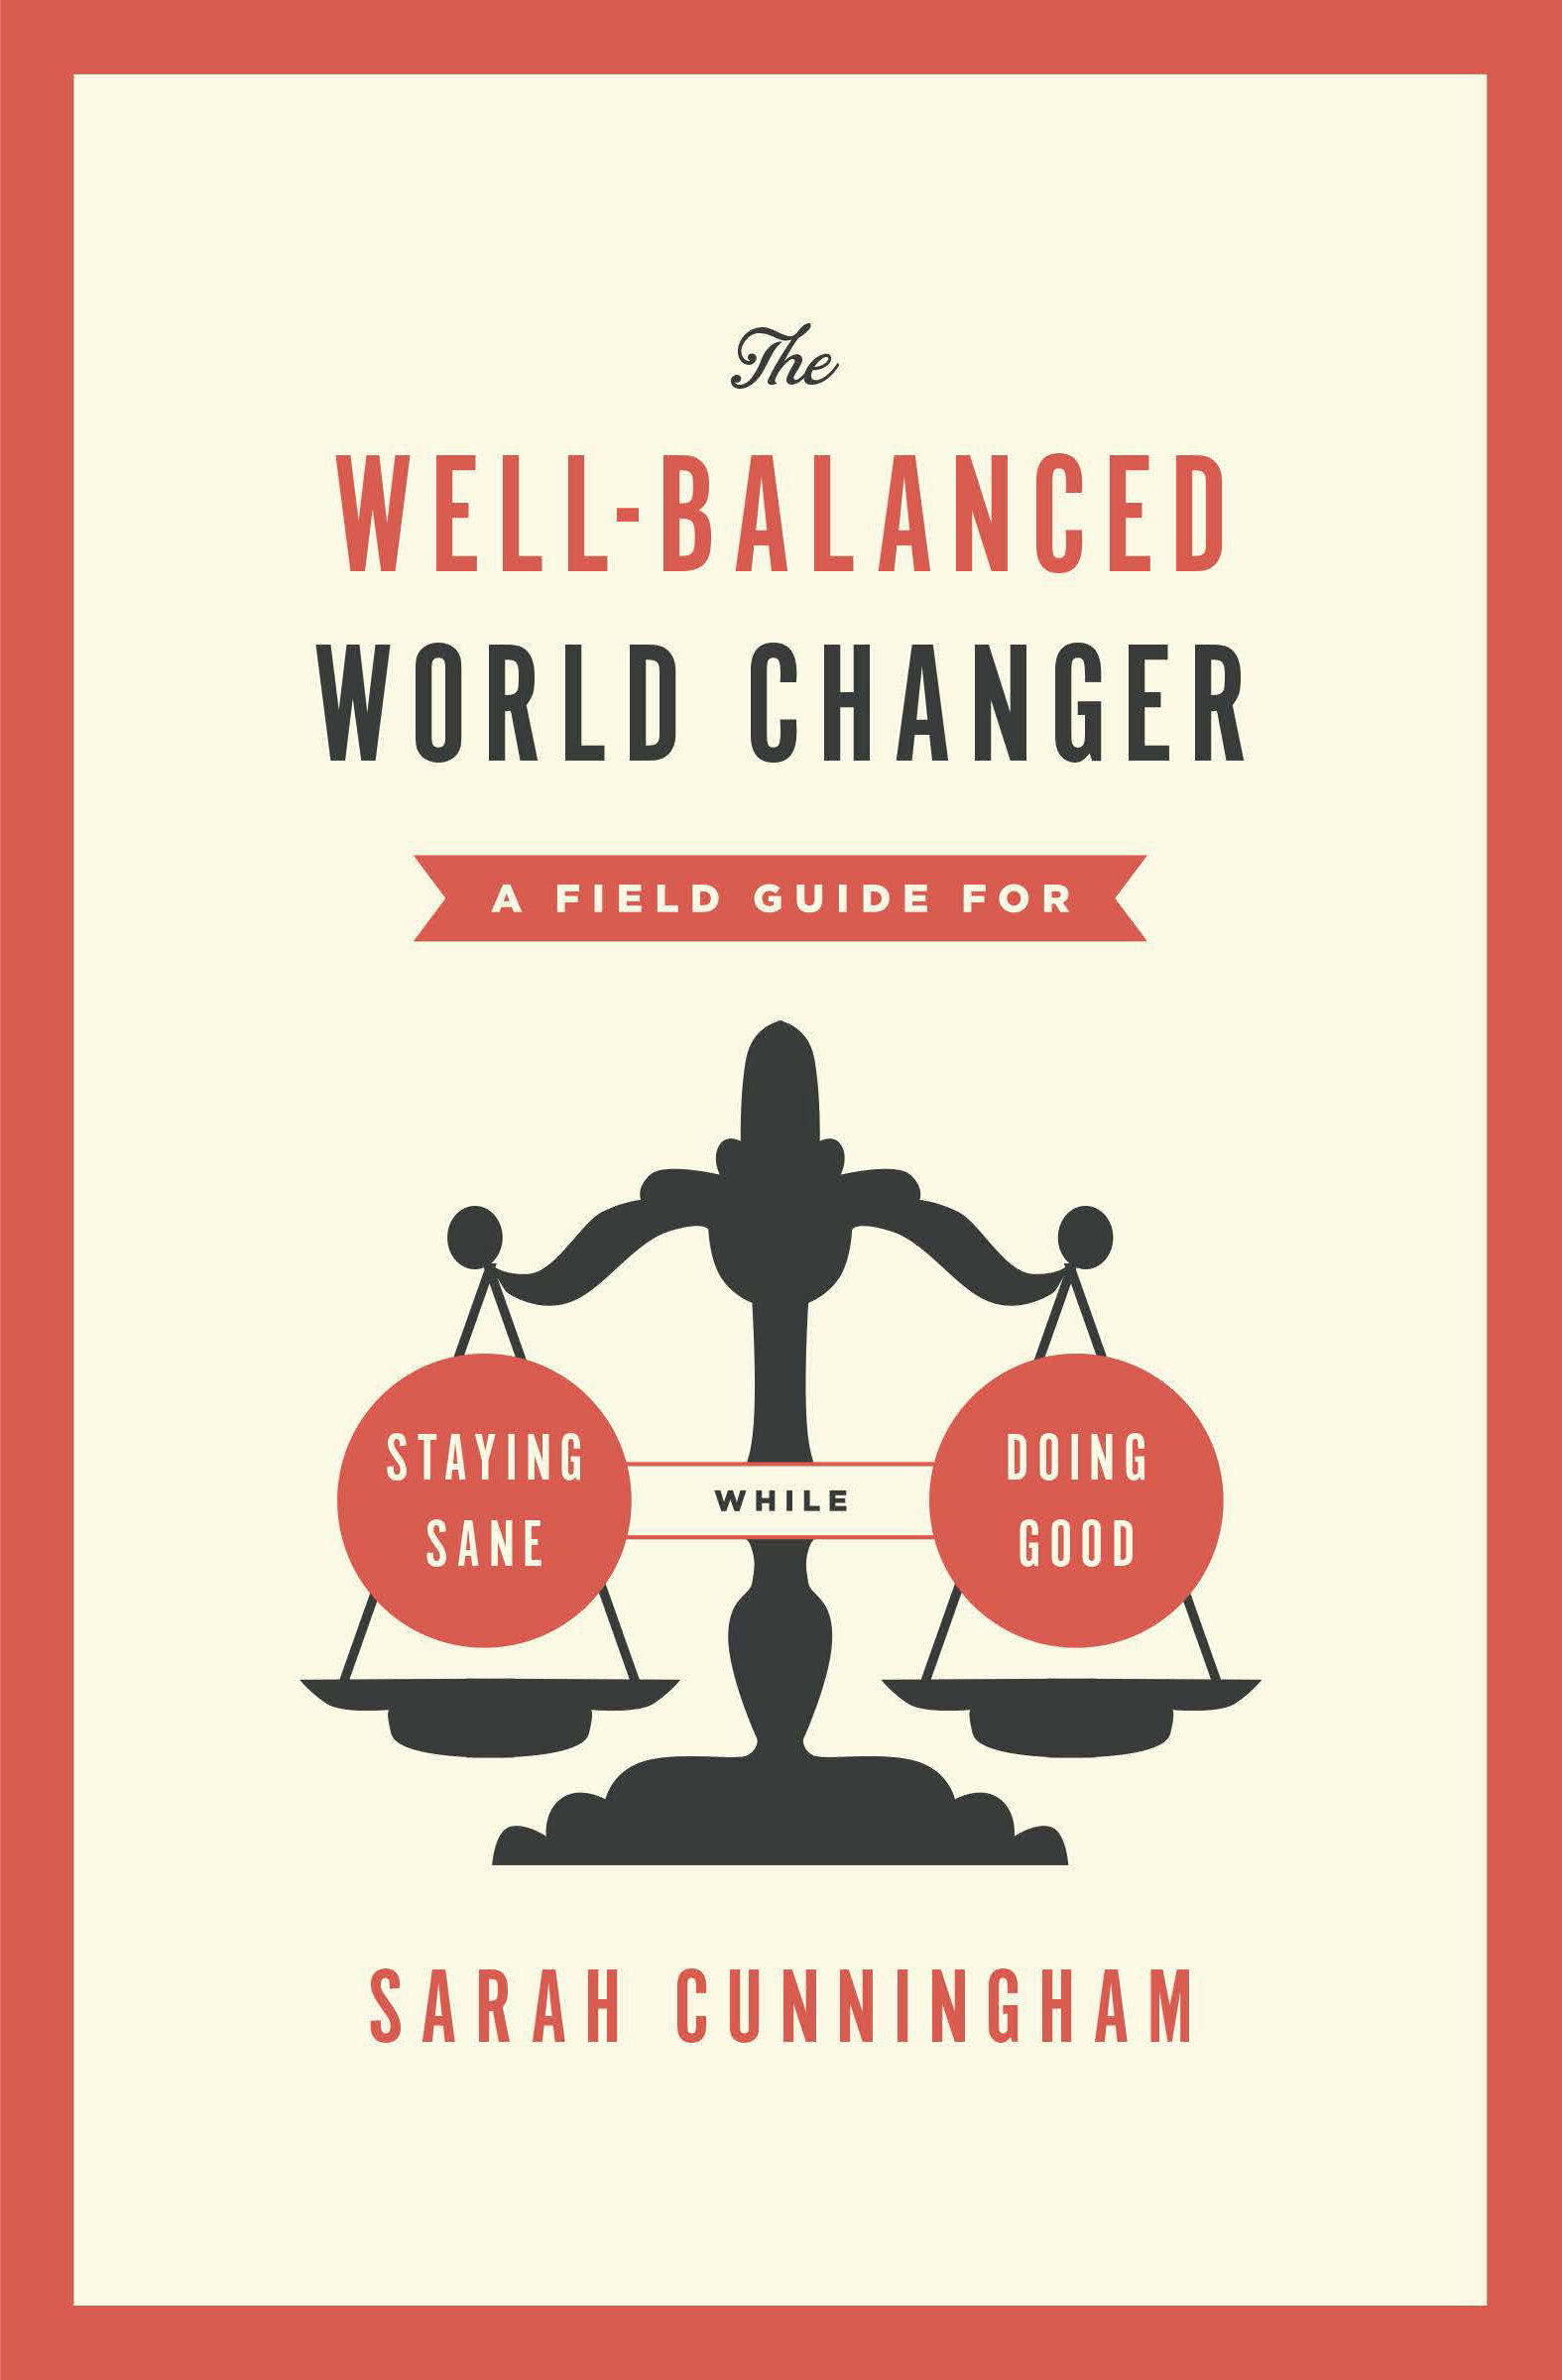 The Well-Balanced World Changer: A Field Guide for Staying Sane While Doing Good